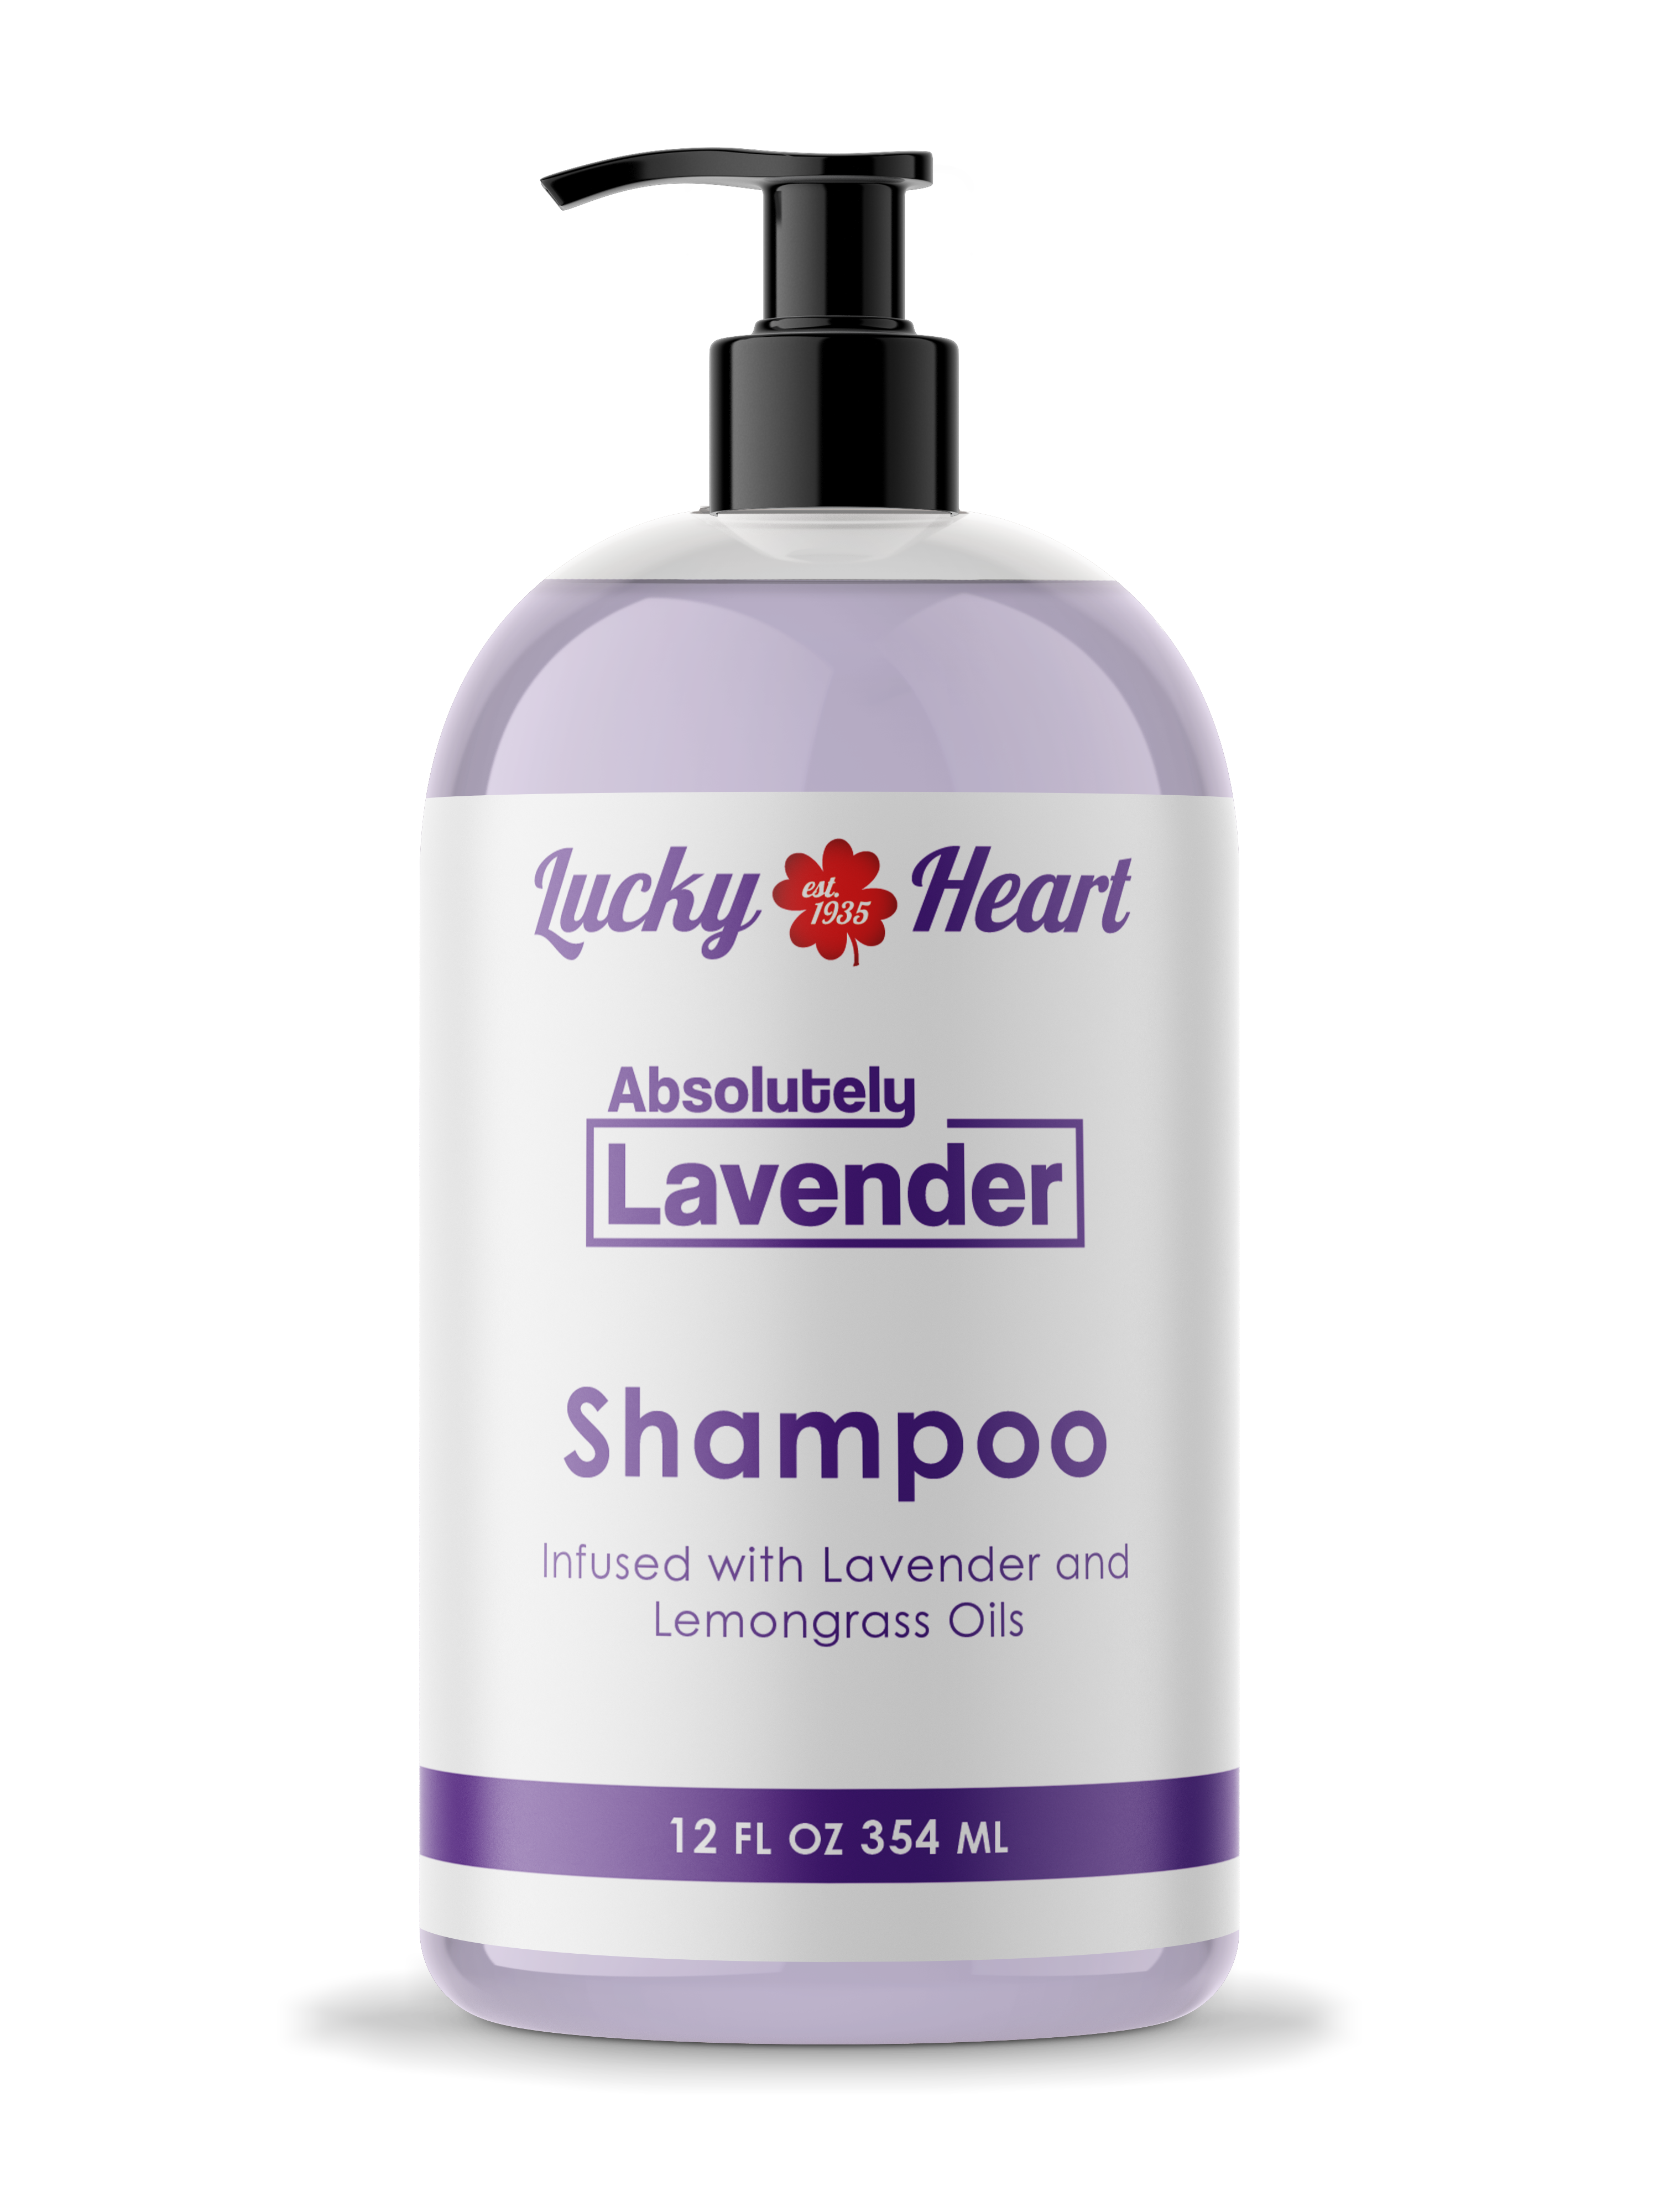 Absolutely Lavender Shampoo